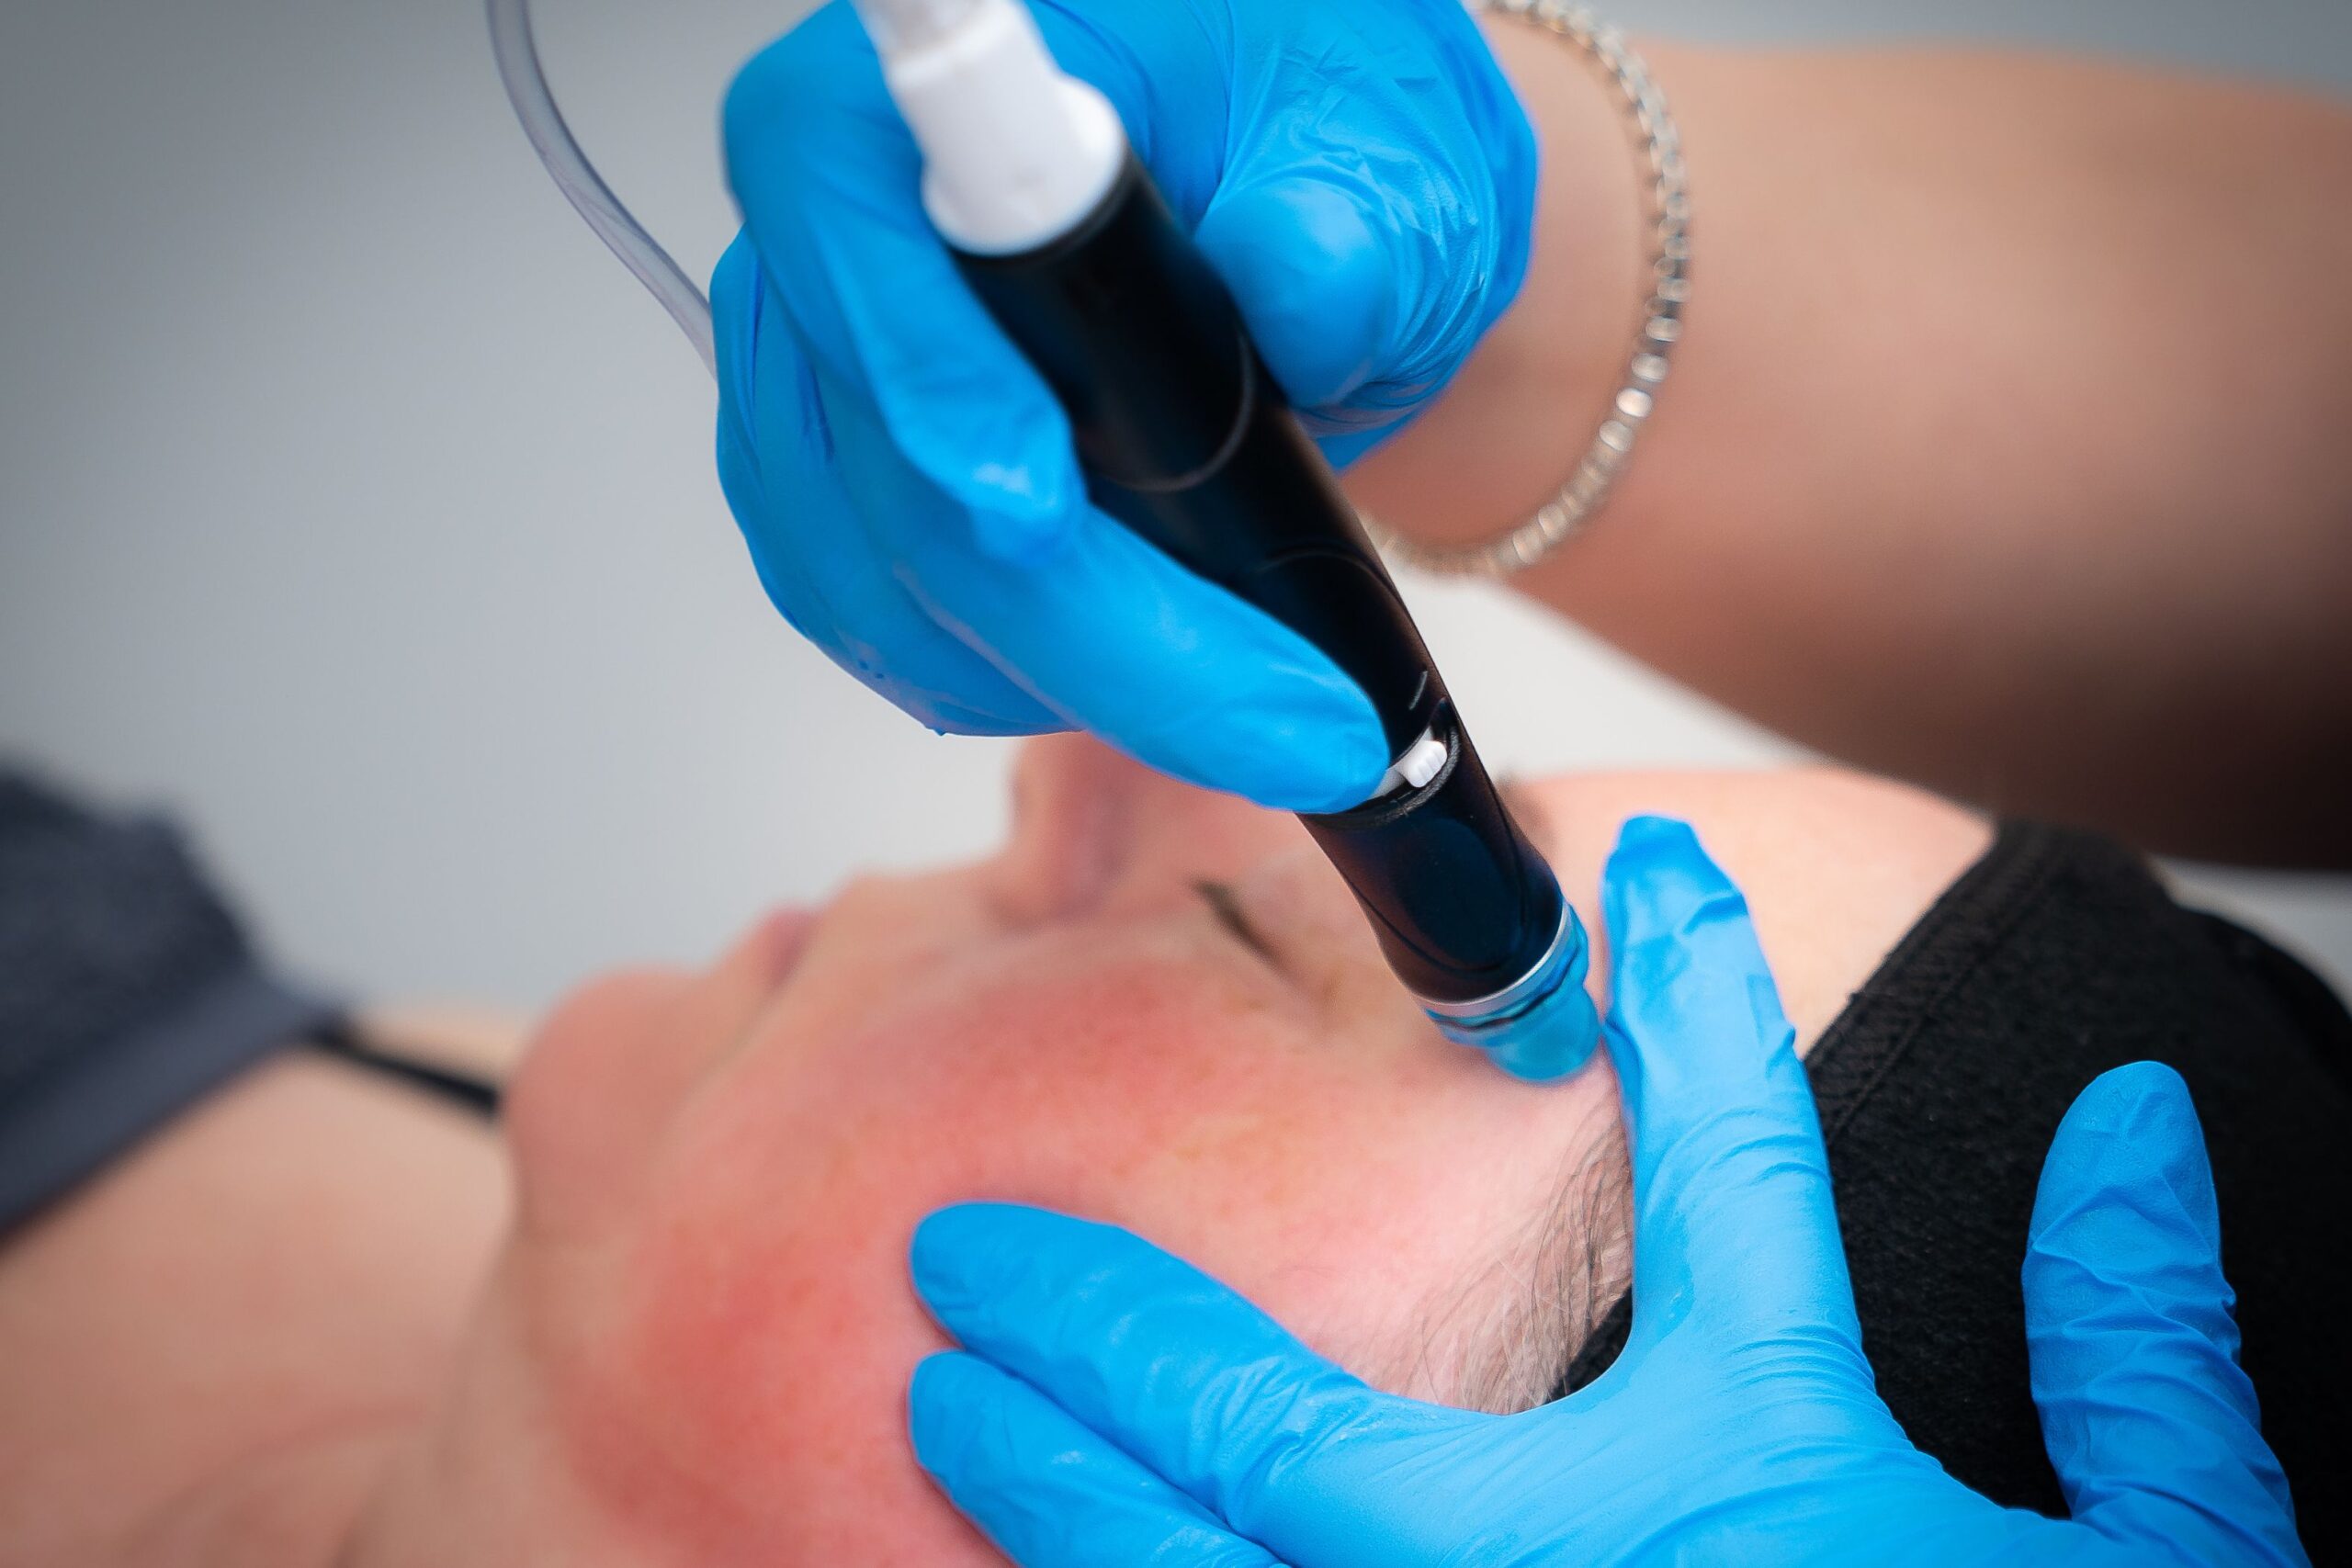 Hydrafacial for dull skin at Freyja Medical in Wrexham, Nantwich and Cheshire